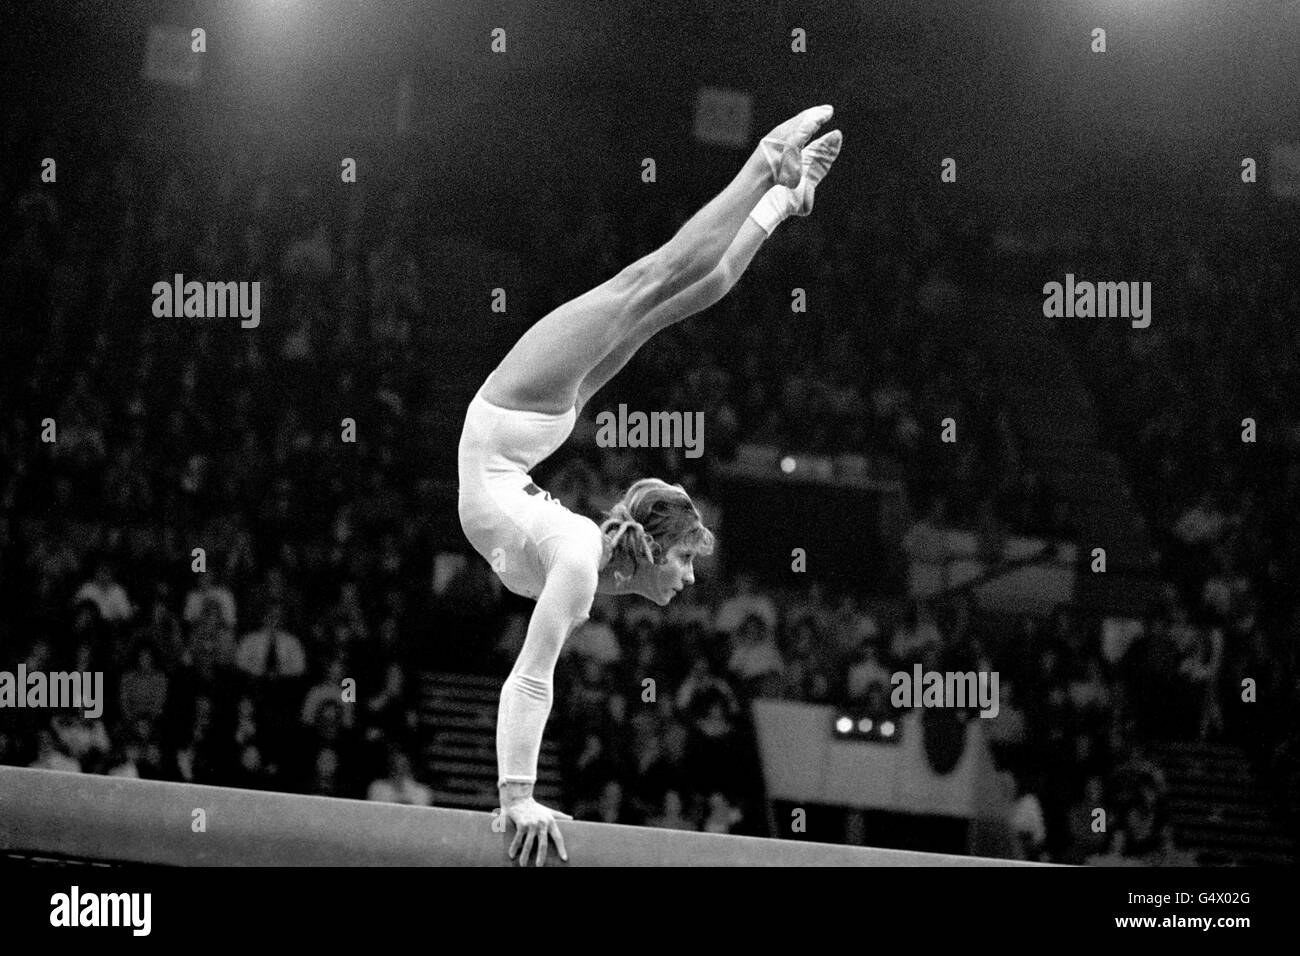 PA NEWS PHOTO 29/10/75 OLGA KORBUT OF THE USSR PERFORMS IN THE WORLD CUP 1975 GYMNASTICS COMPETITION AT THE EMPIRE POOL, WEMBLEY. Stock Photo